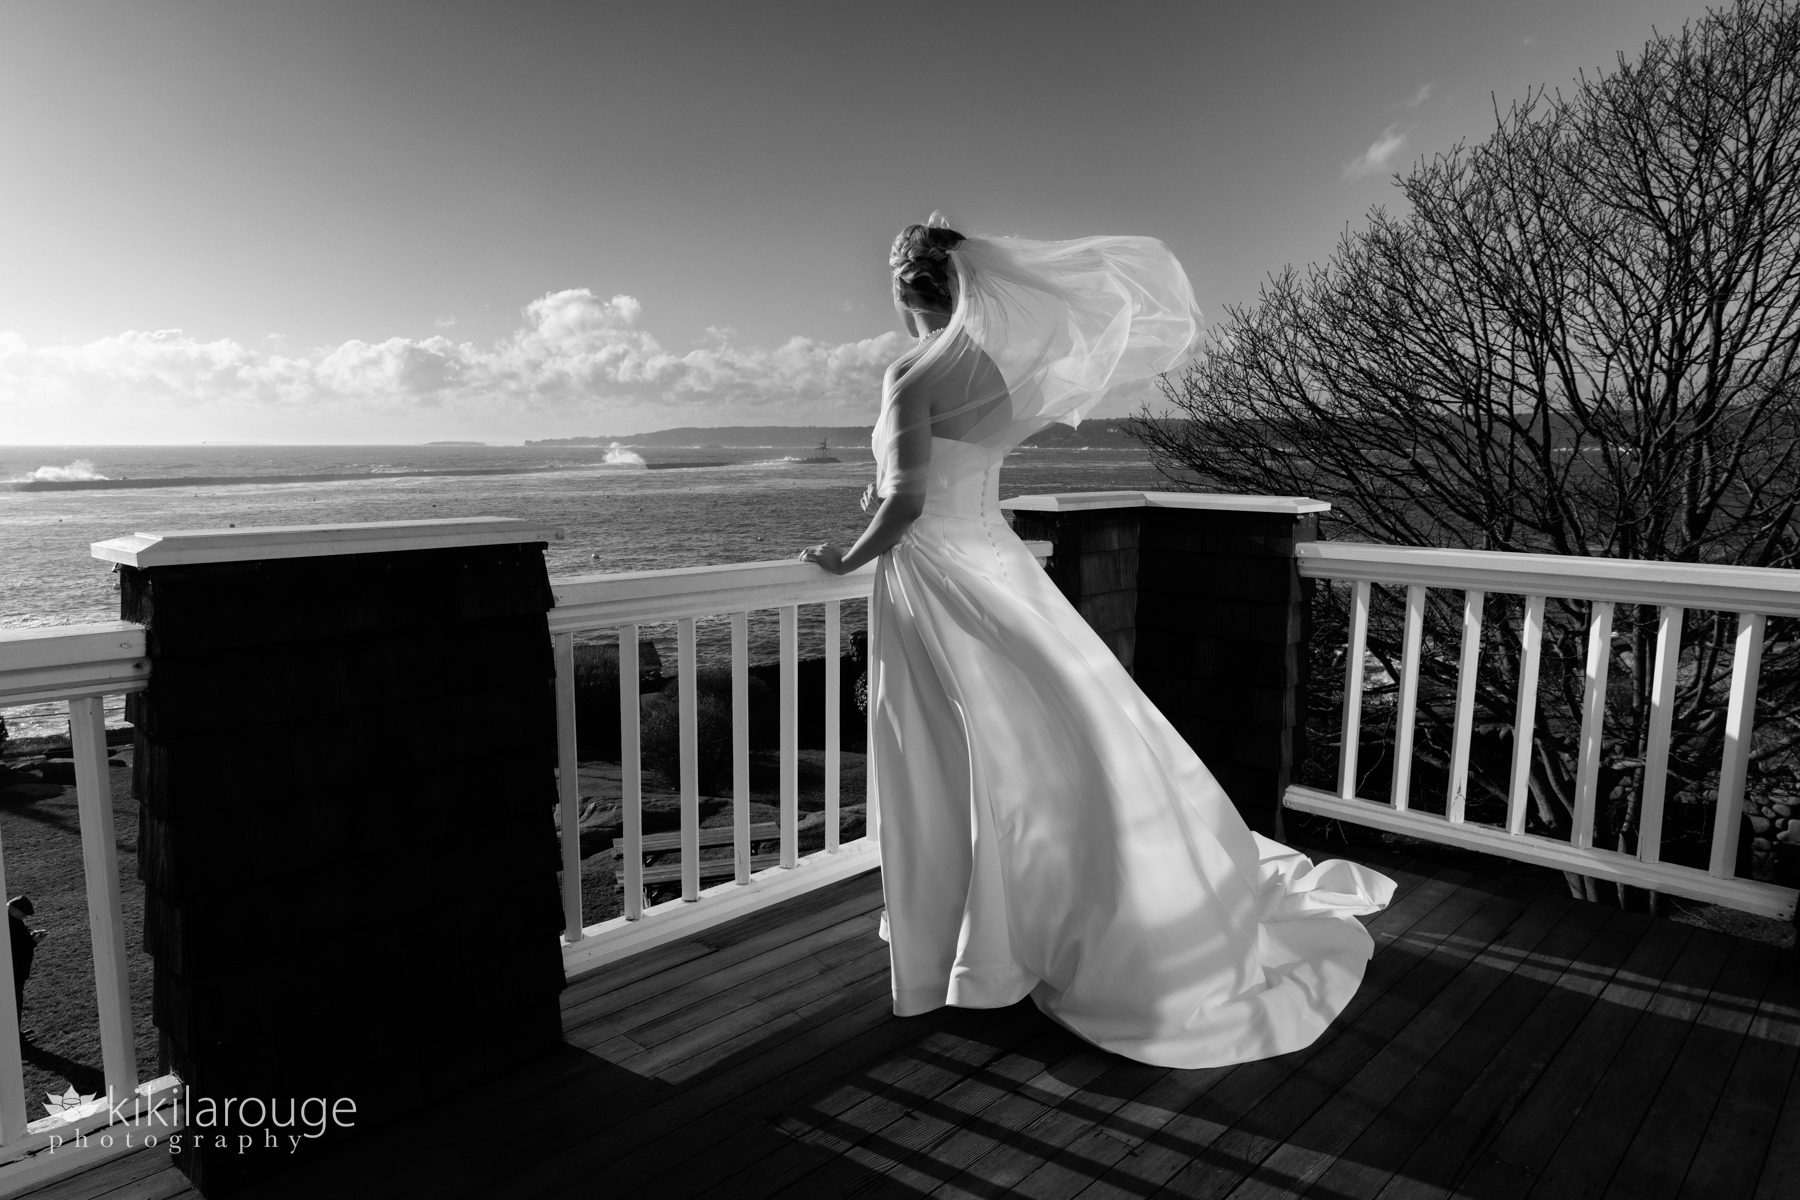 BW of bride standing at the edge of a deck with the wind blowing hair and veil